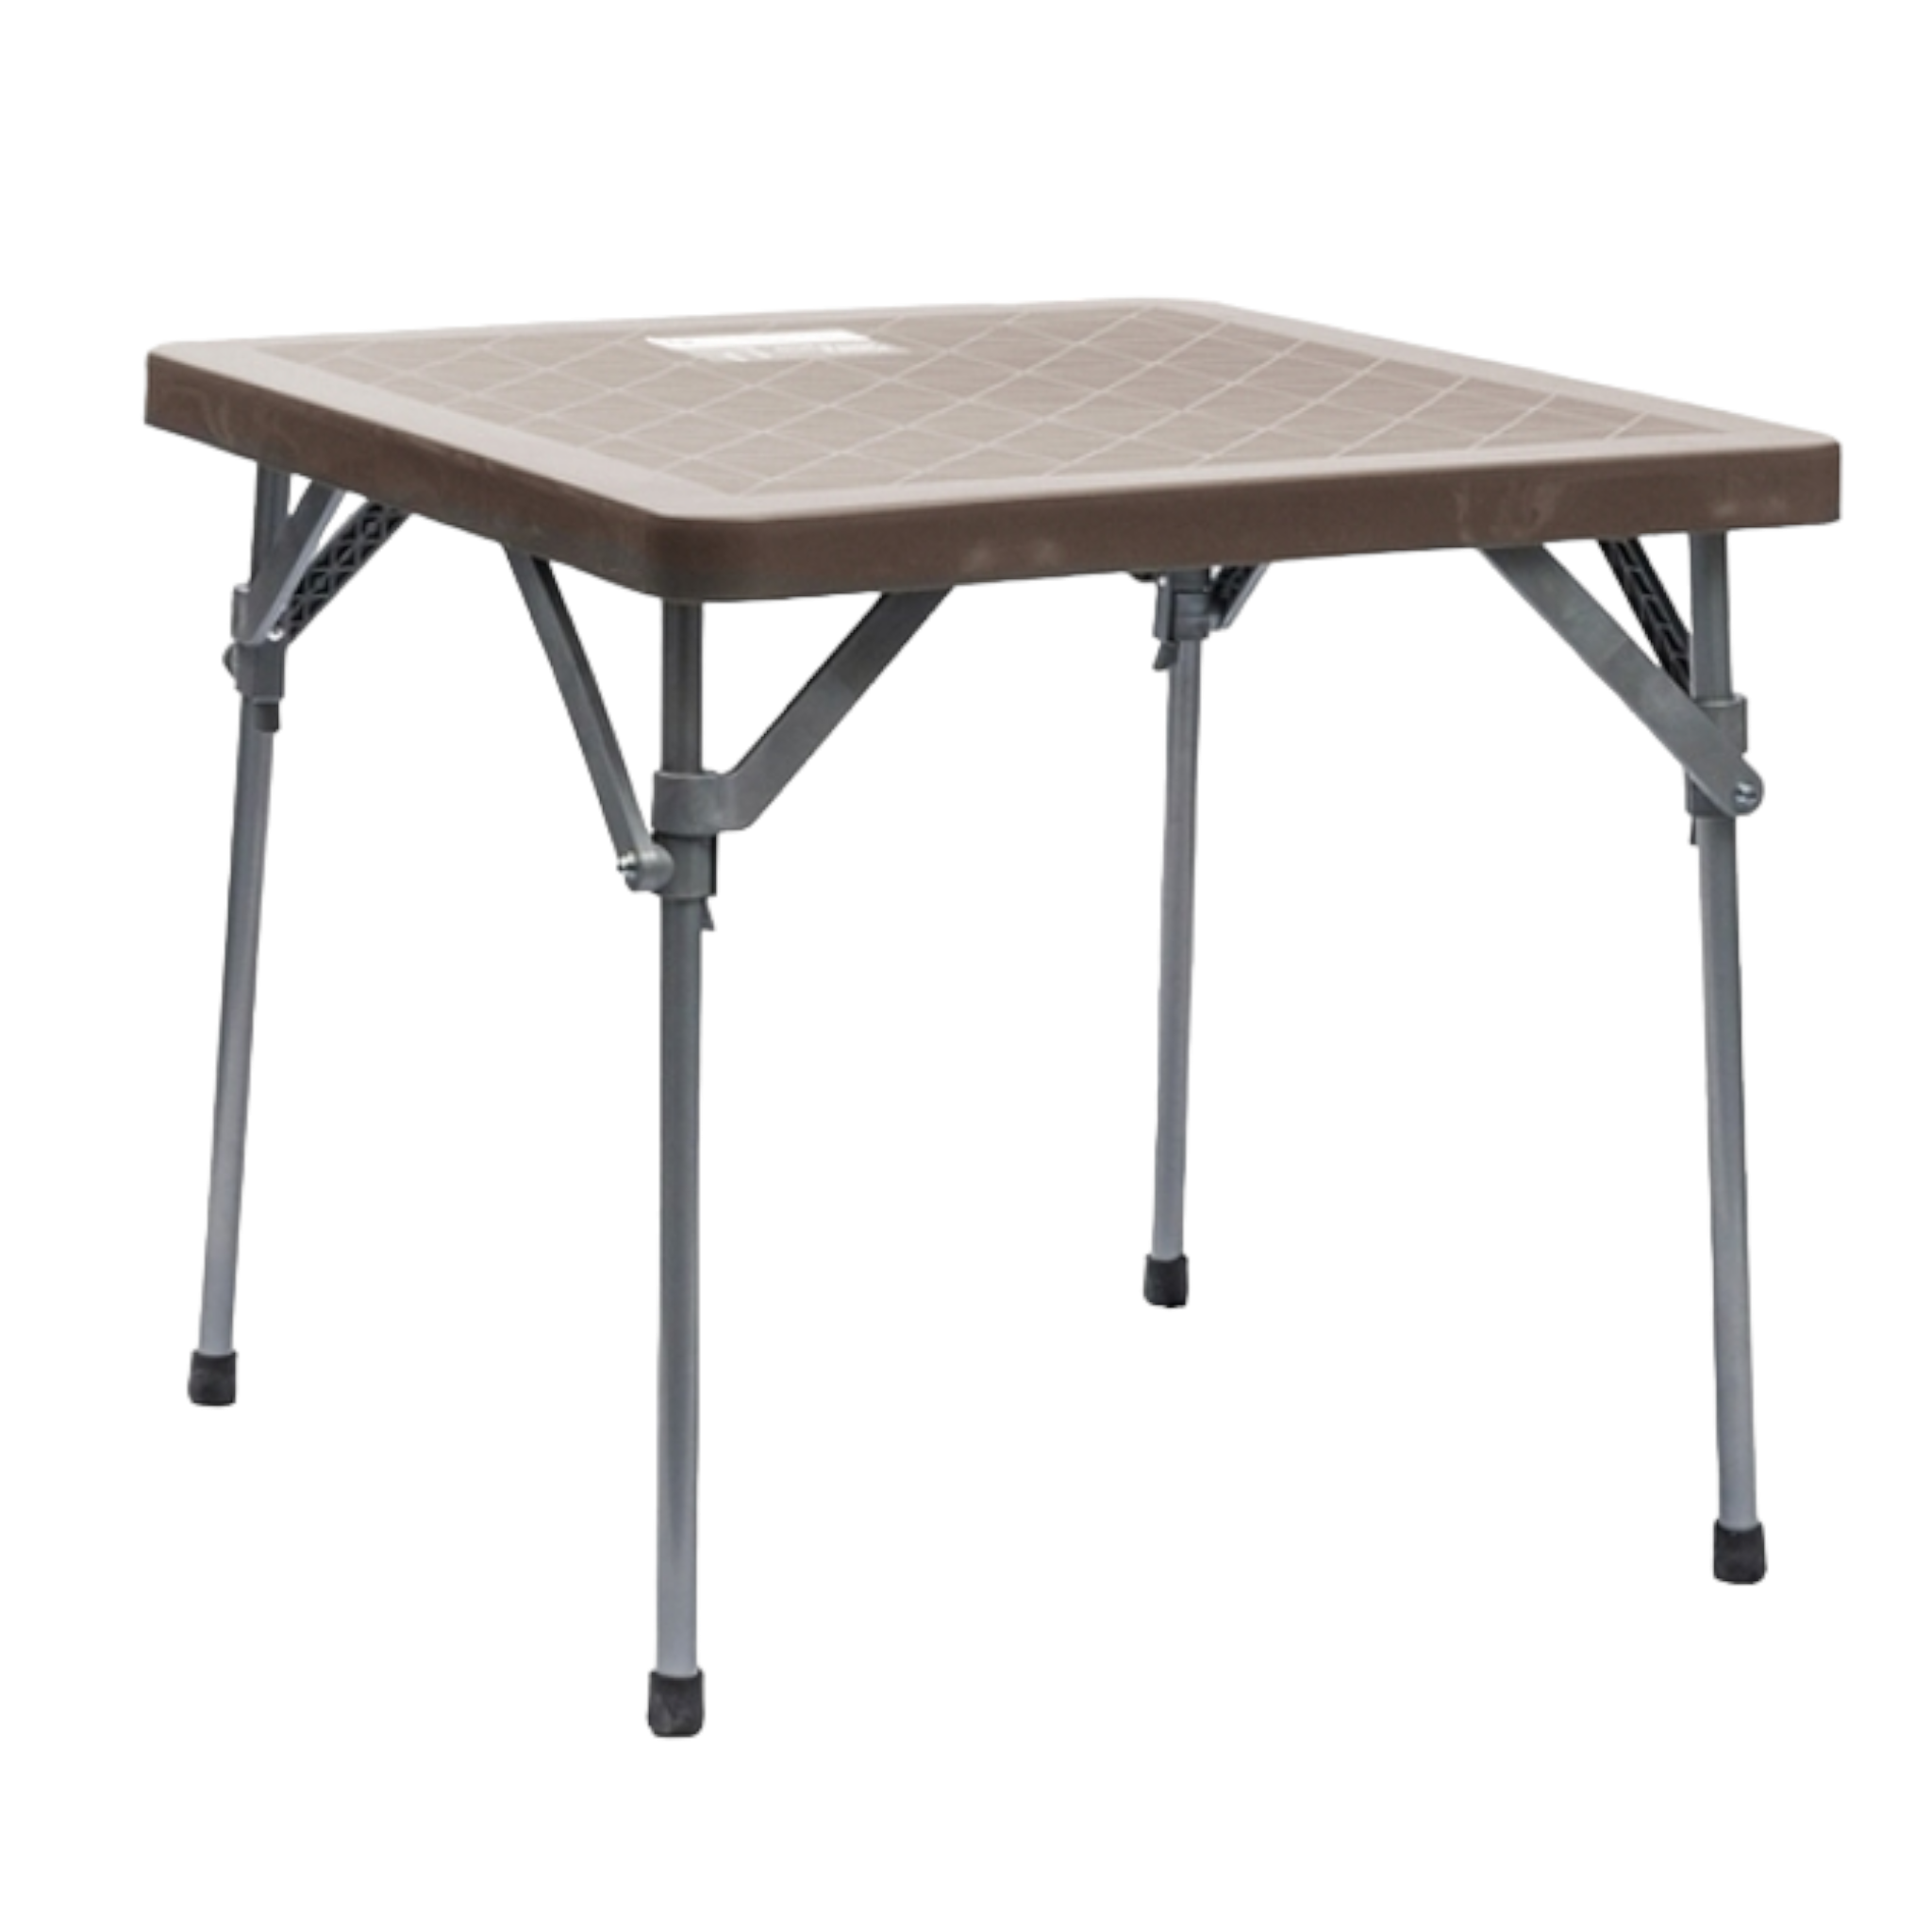 Tia Plastic Collapsible Table 4 Seater